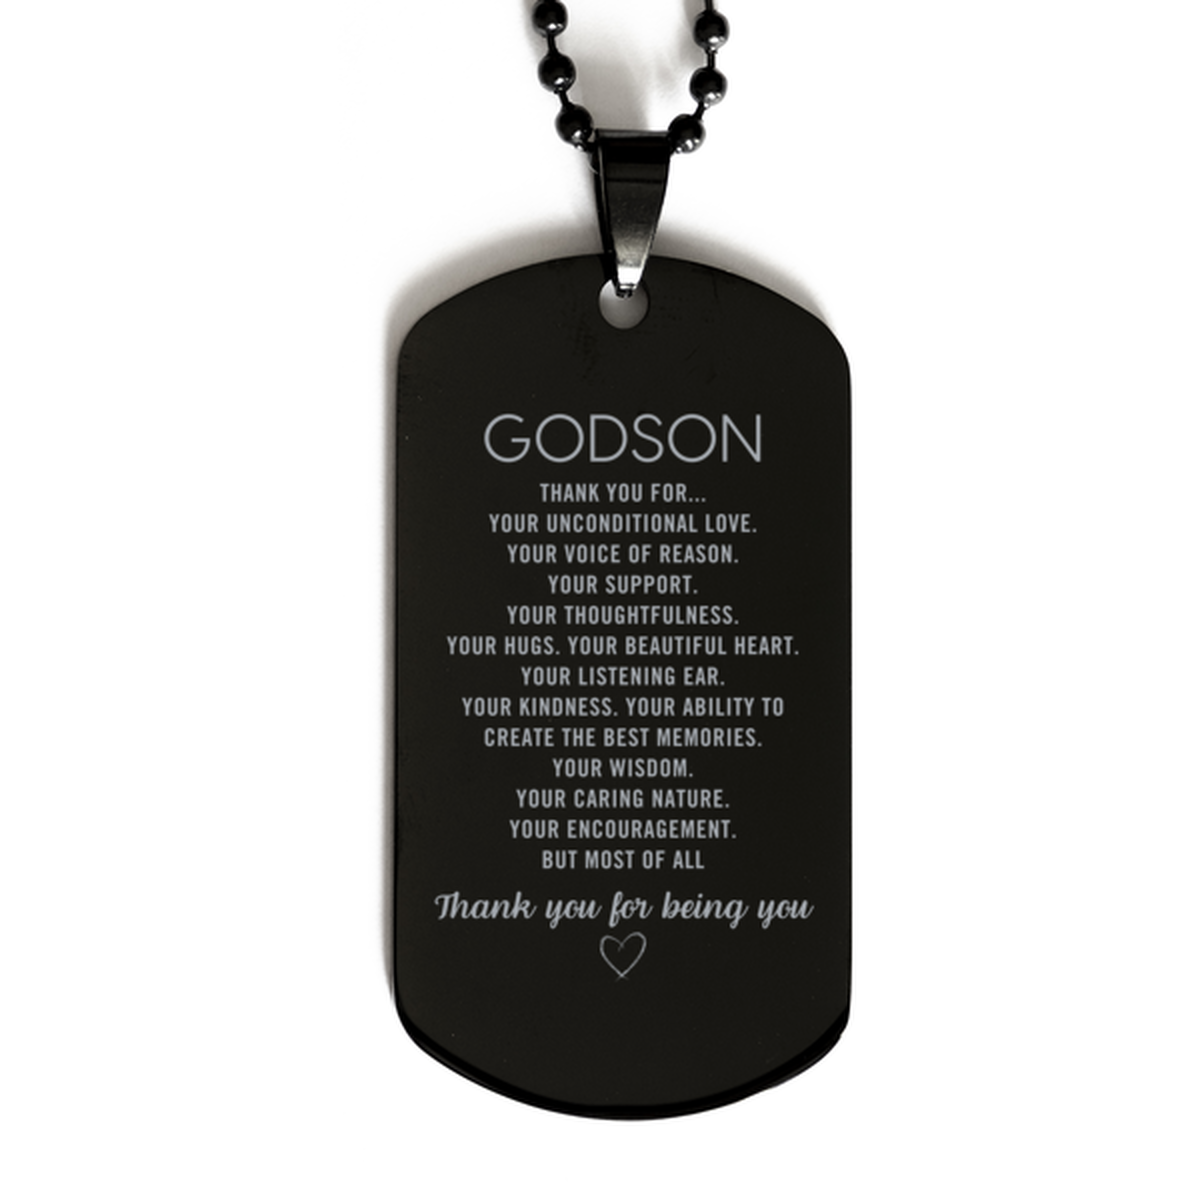 Godson Black Dog Tag Custom, Engraved Gifts For Godson Christmas Graduation Birthday Gifts for Men Women Godson Thank you for Your unconditional love